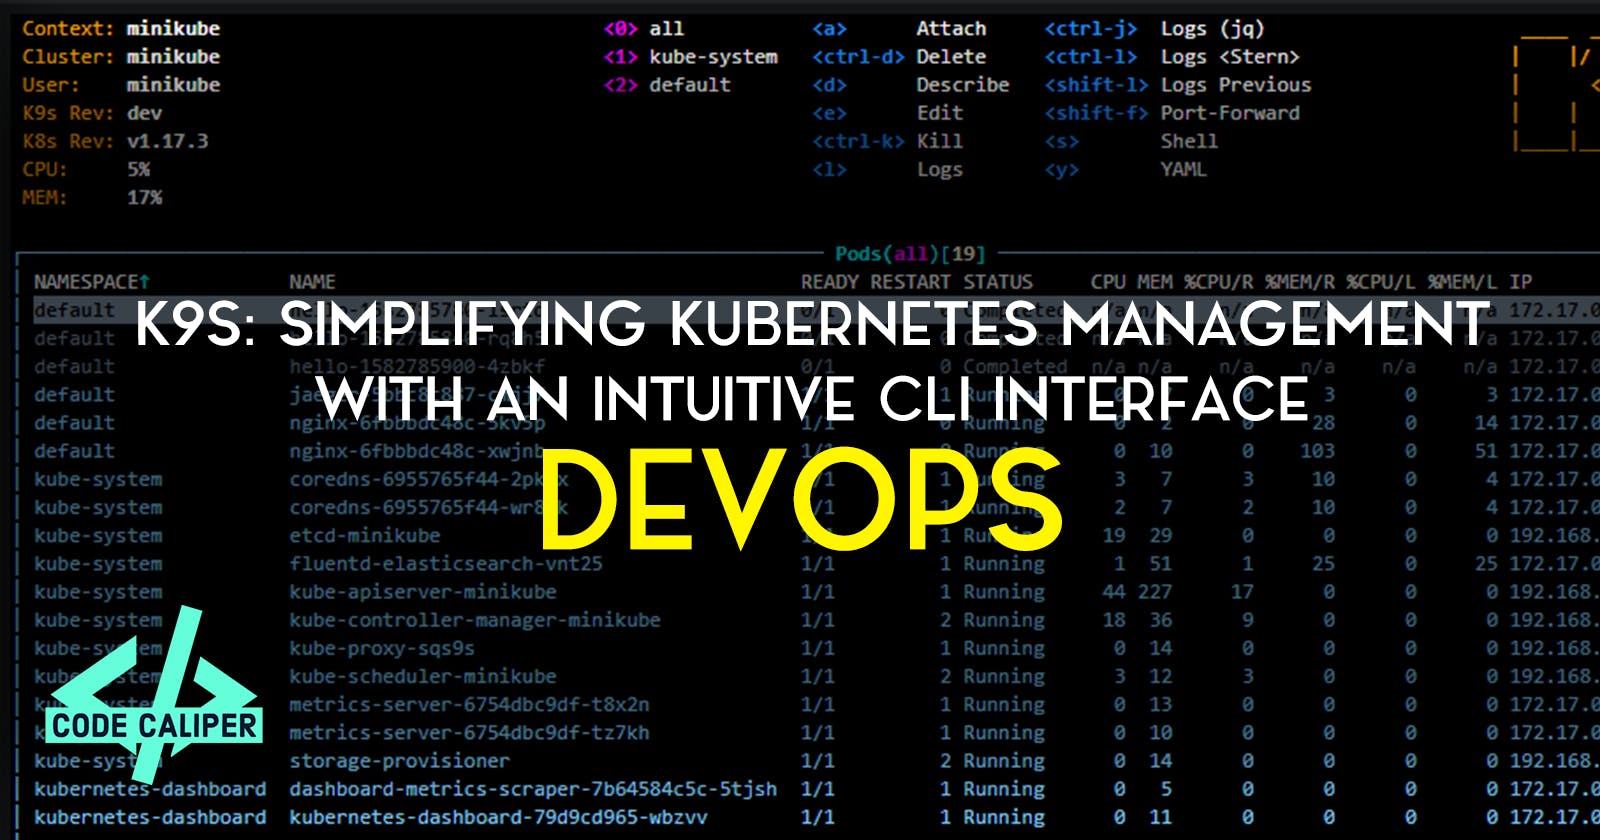 K9s: Simplifying Kubernetes Management with an Intuitive CLI Interface